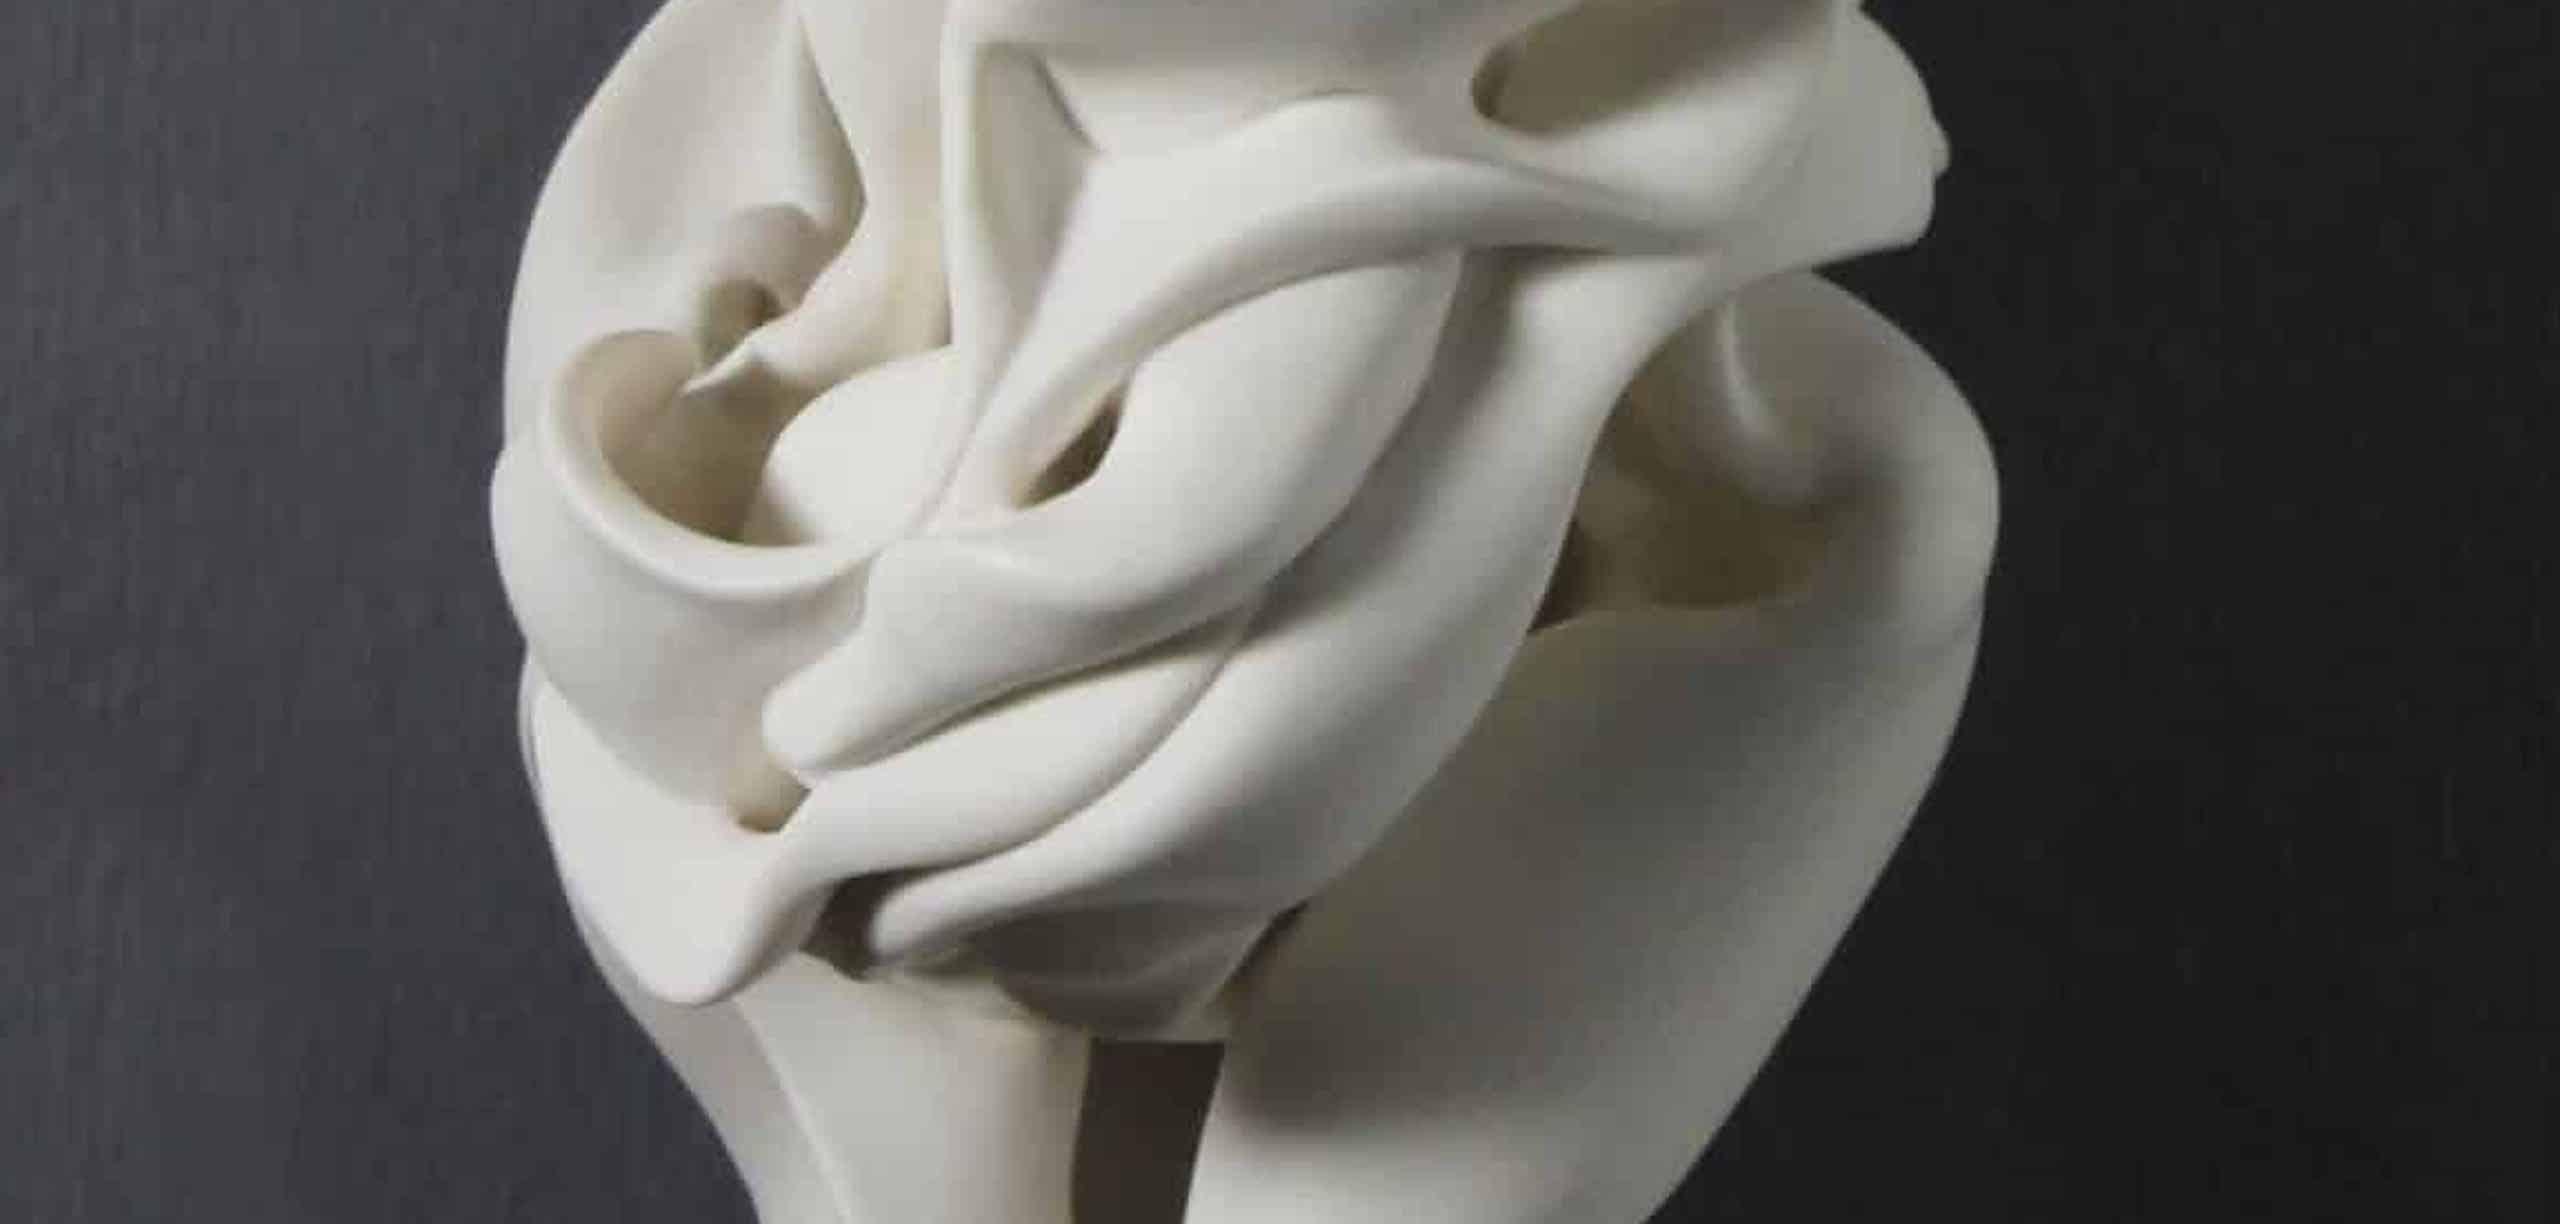 Motion by Sharon Brill - Abstract wall sculpture, porcelain, organic forms For Sale 1